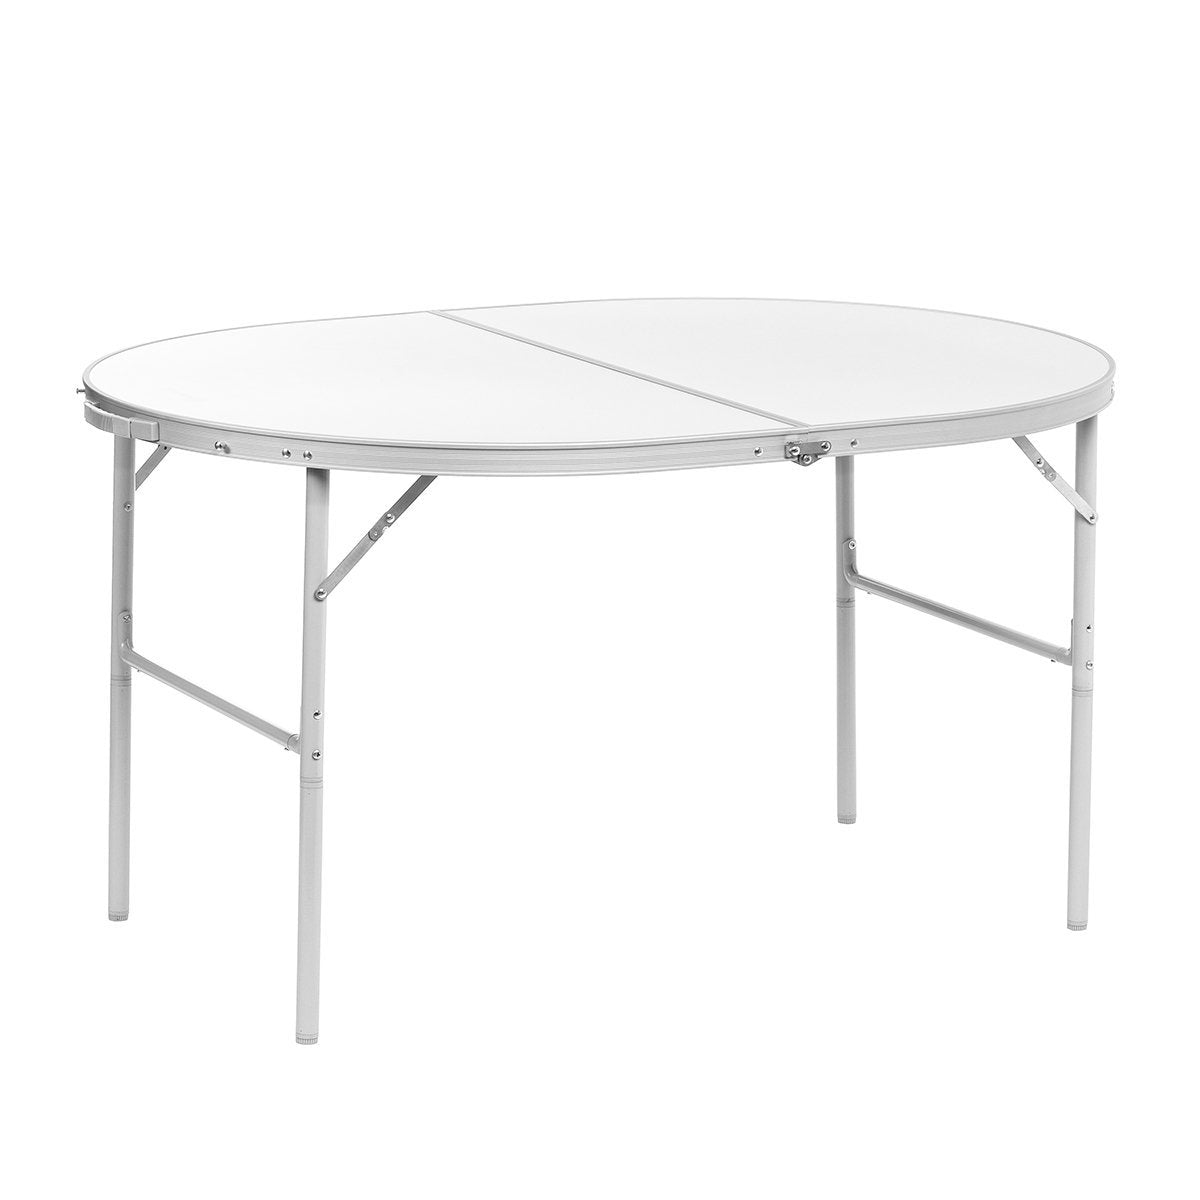 Oval Portable Aluminum Folding Camping Table